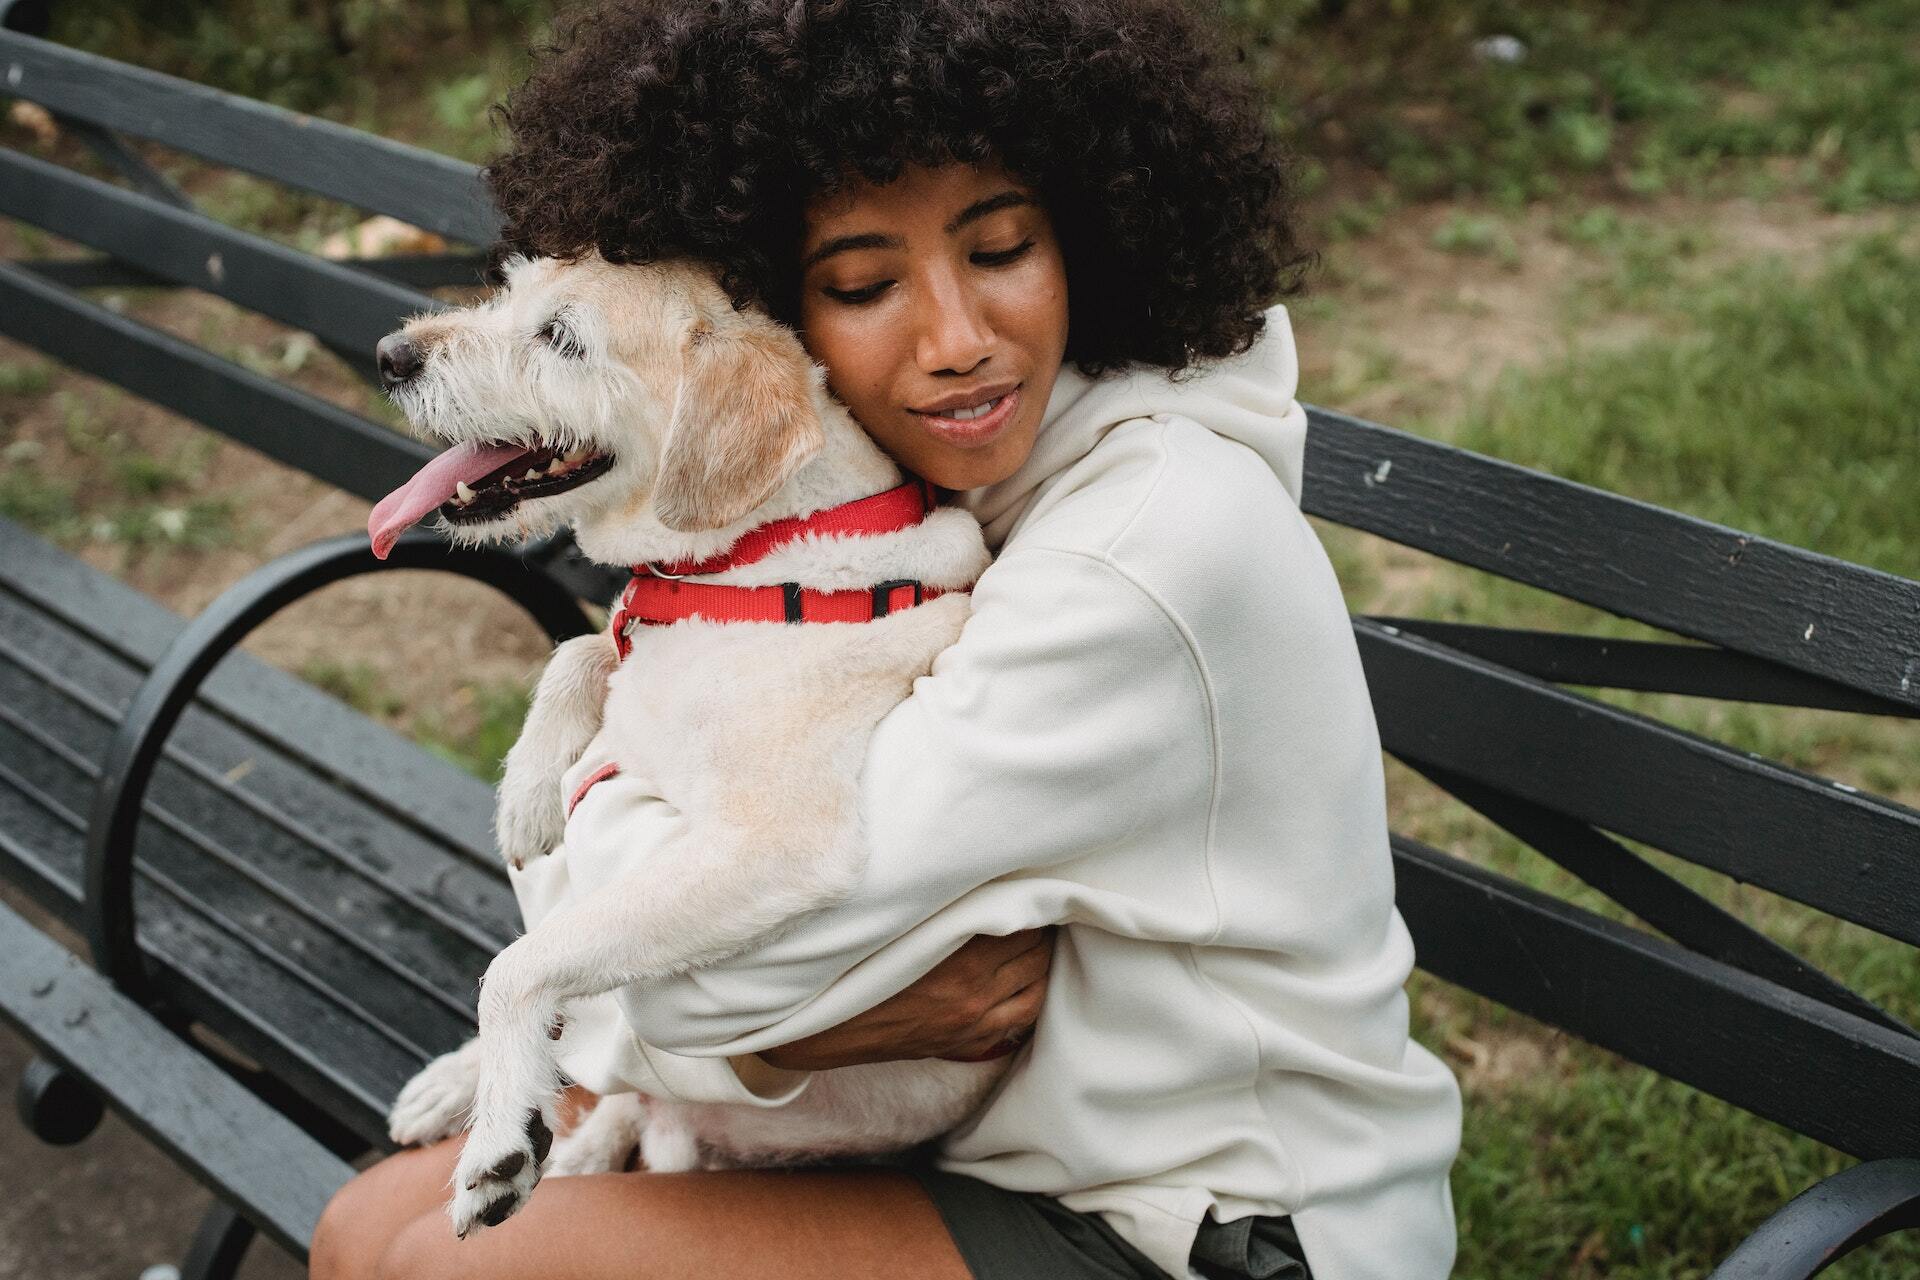 A woman hugging her dog who's wearing a red harness